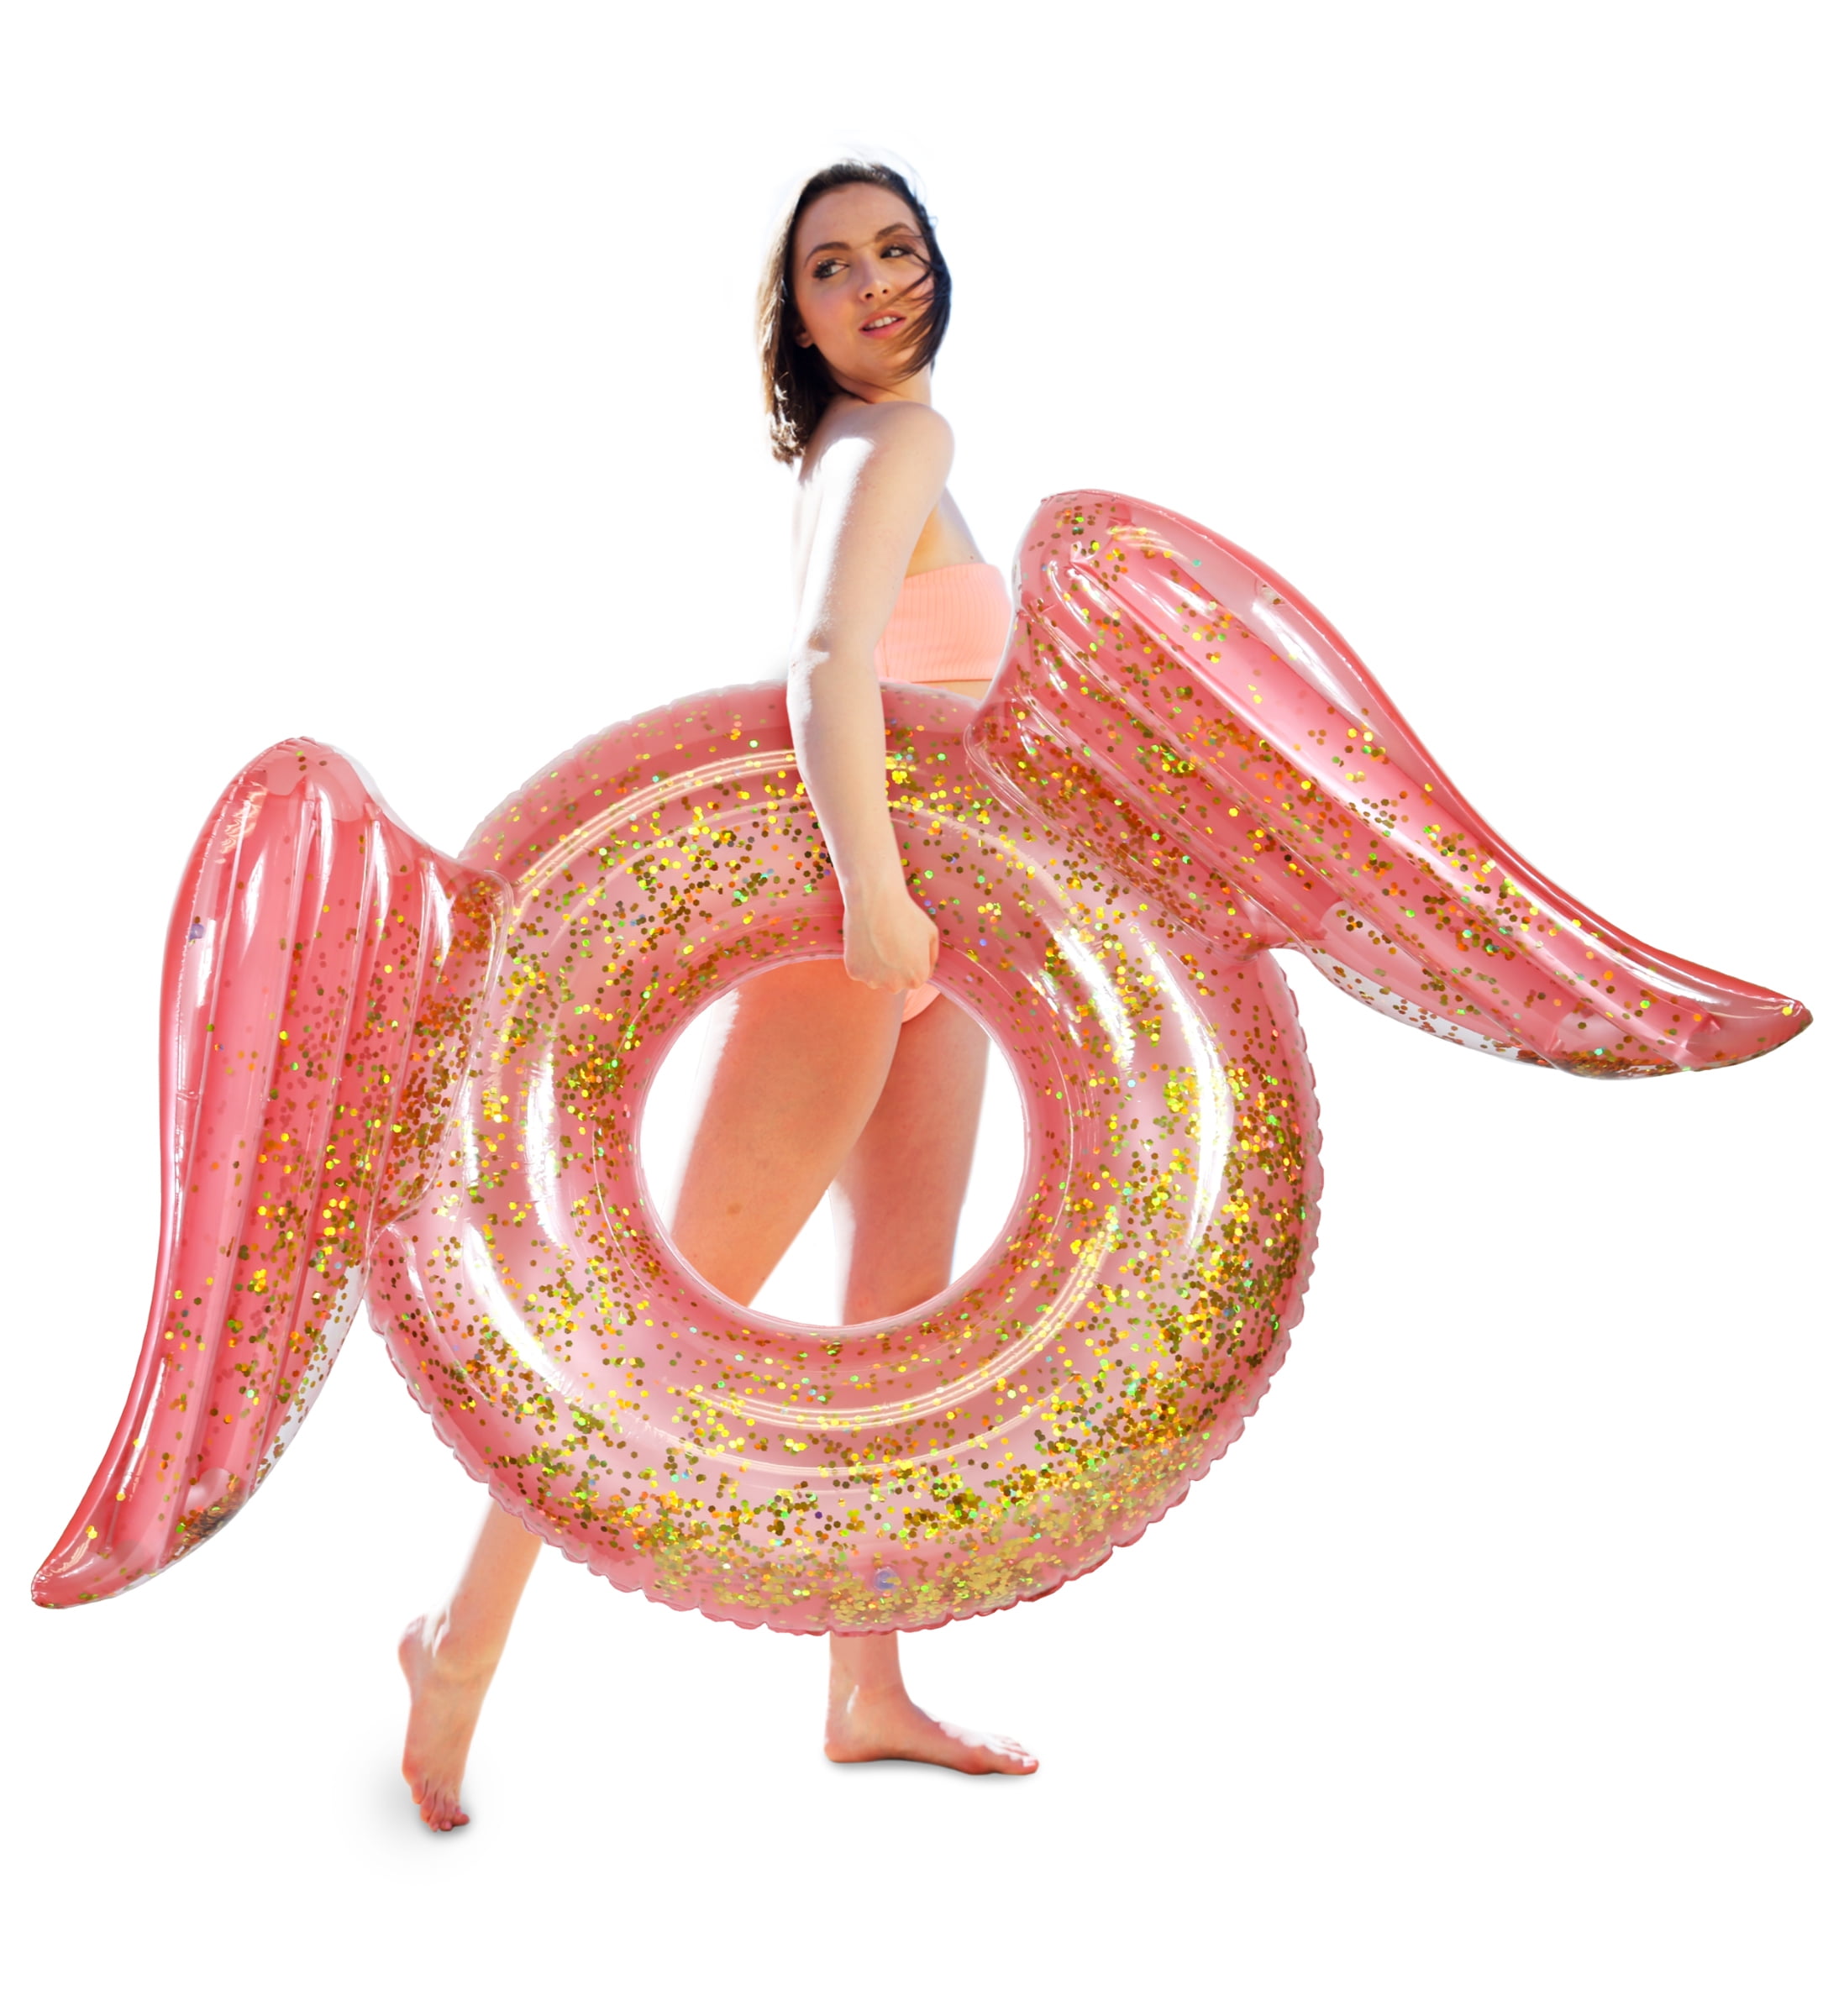 Unisex Swim Ring Inflatable Pool Toys Mermaid Swim Ring Water Inflatable Adult Supplies Oversized Thick Floating Row Floating Bed Swimming Lifebuoy